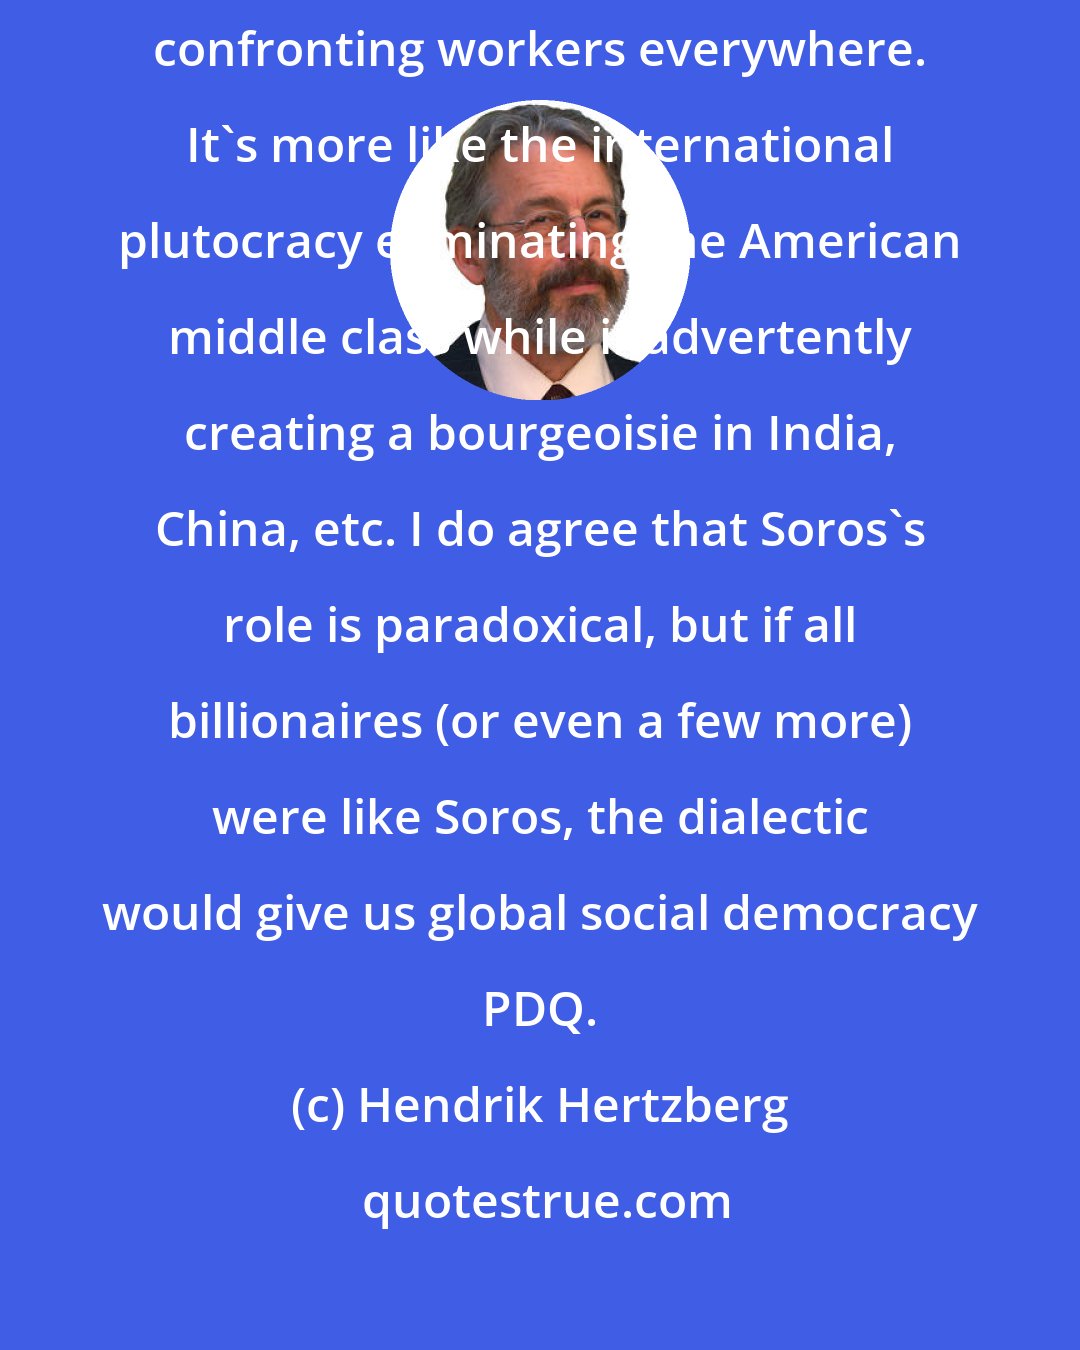 Hendrik Hertzberg: I can't agree that what we're seeing is a matter of the American bourgeoisie confronting workers everywhere. It's more like the international plutocracy eliminating the American middle class while inadvertently creating a bourgeoisie in India, China, etc. I do agree that Soros's role is paradoxical, but if all billionaires (or even a few more) were like Soros, the dialectic would give us global social democracy PDQ.